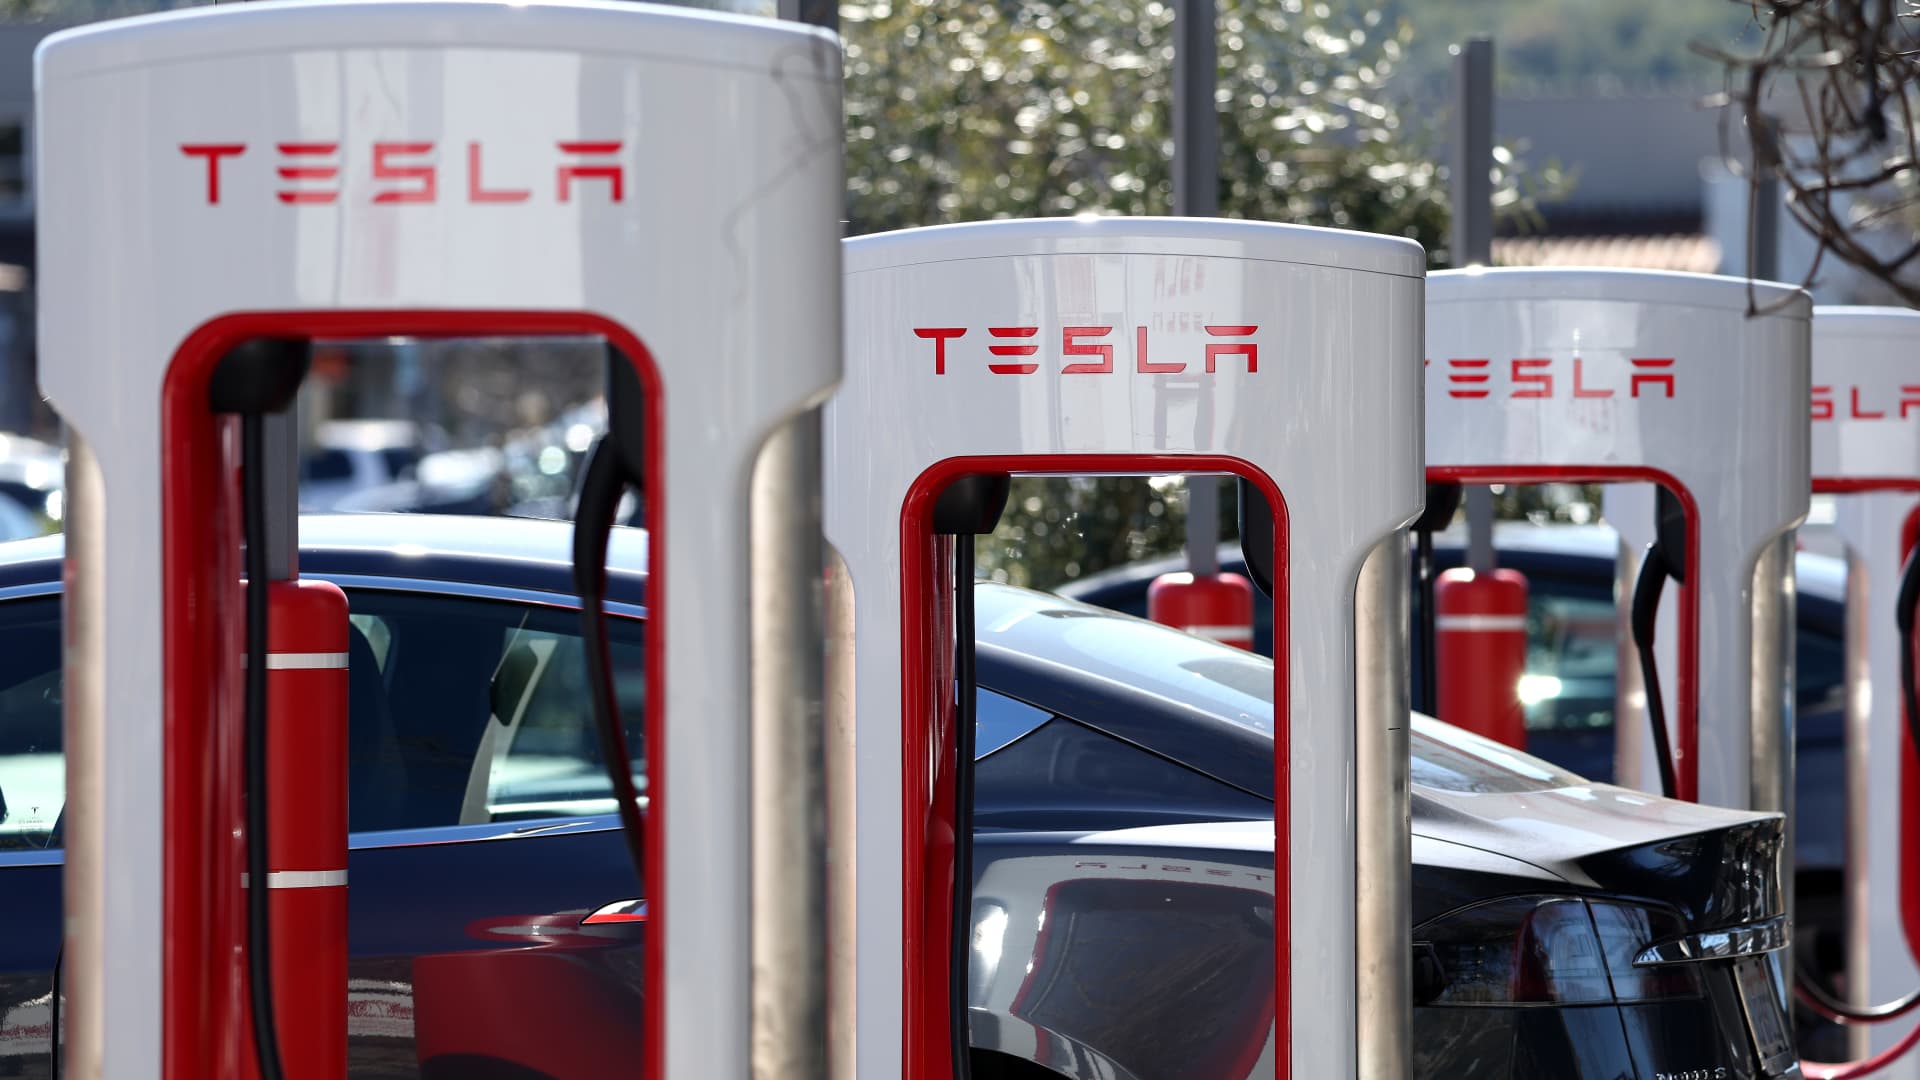 This automaker is set for Tesla supercharger deal: Analyst